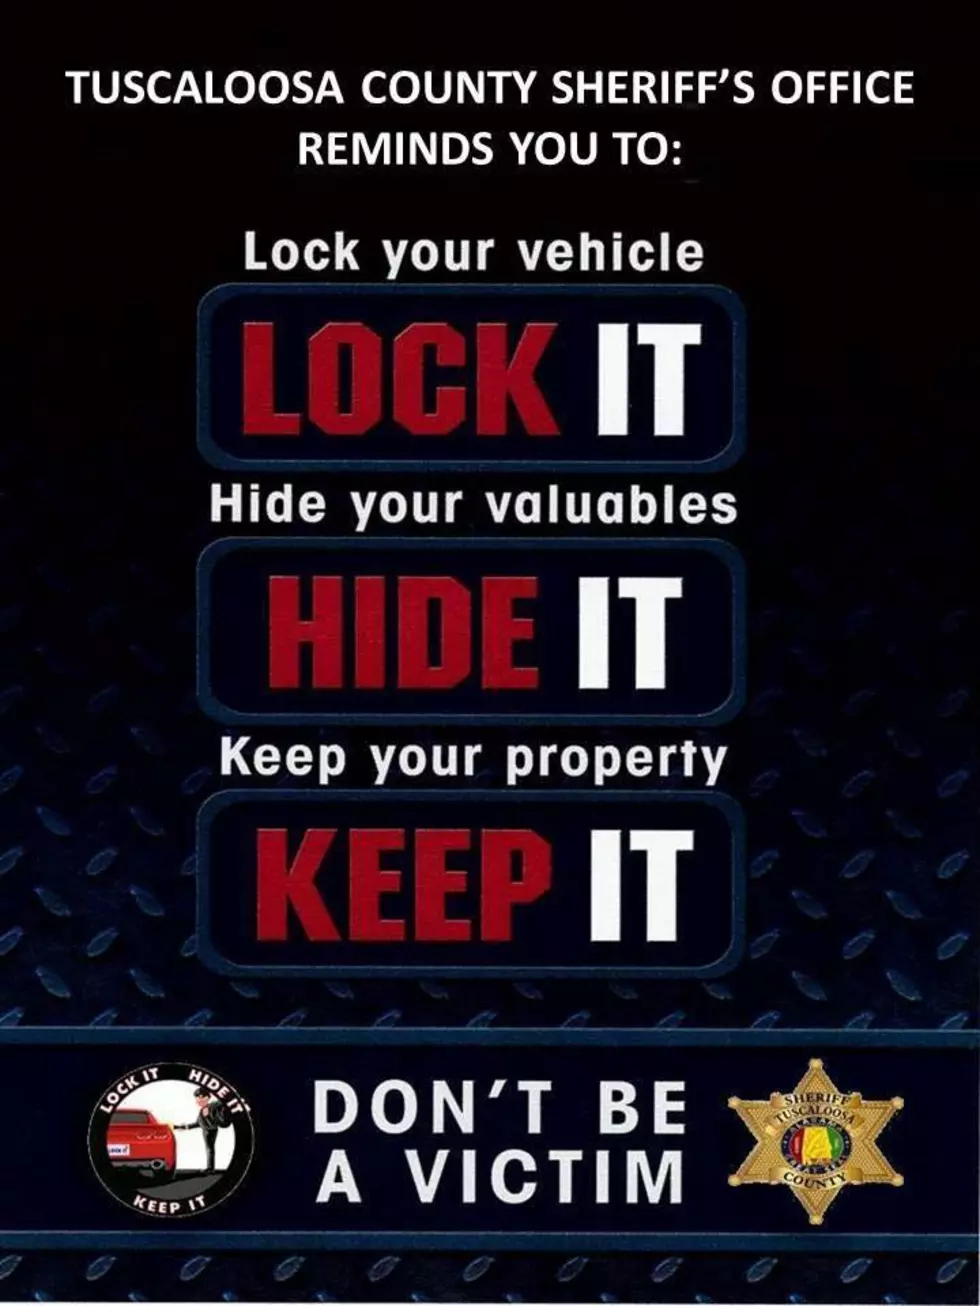 Vehicle Break-Ins Up 44% In Tuscaloosa County